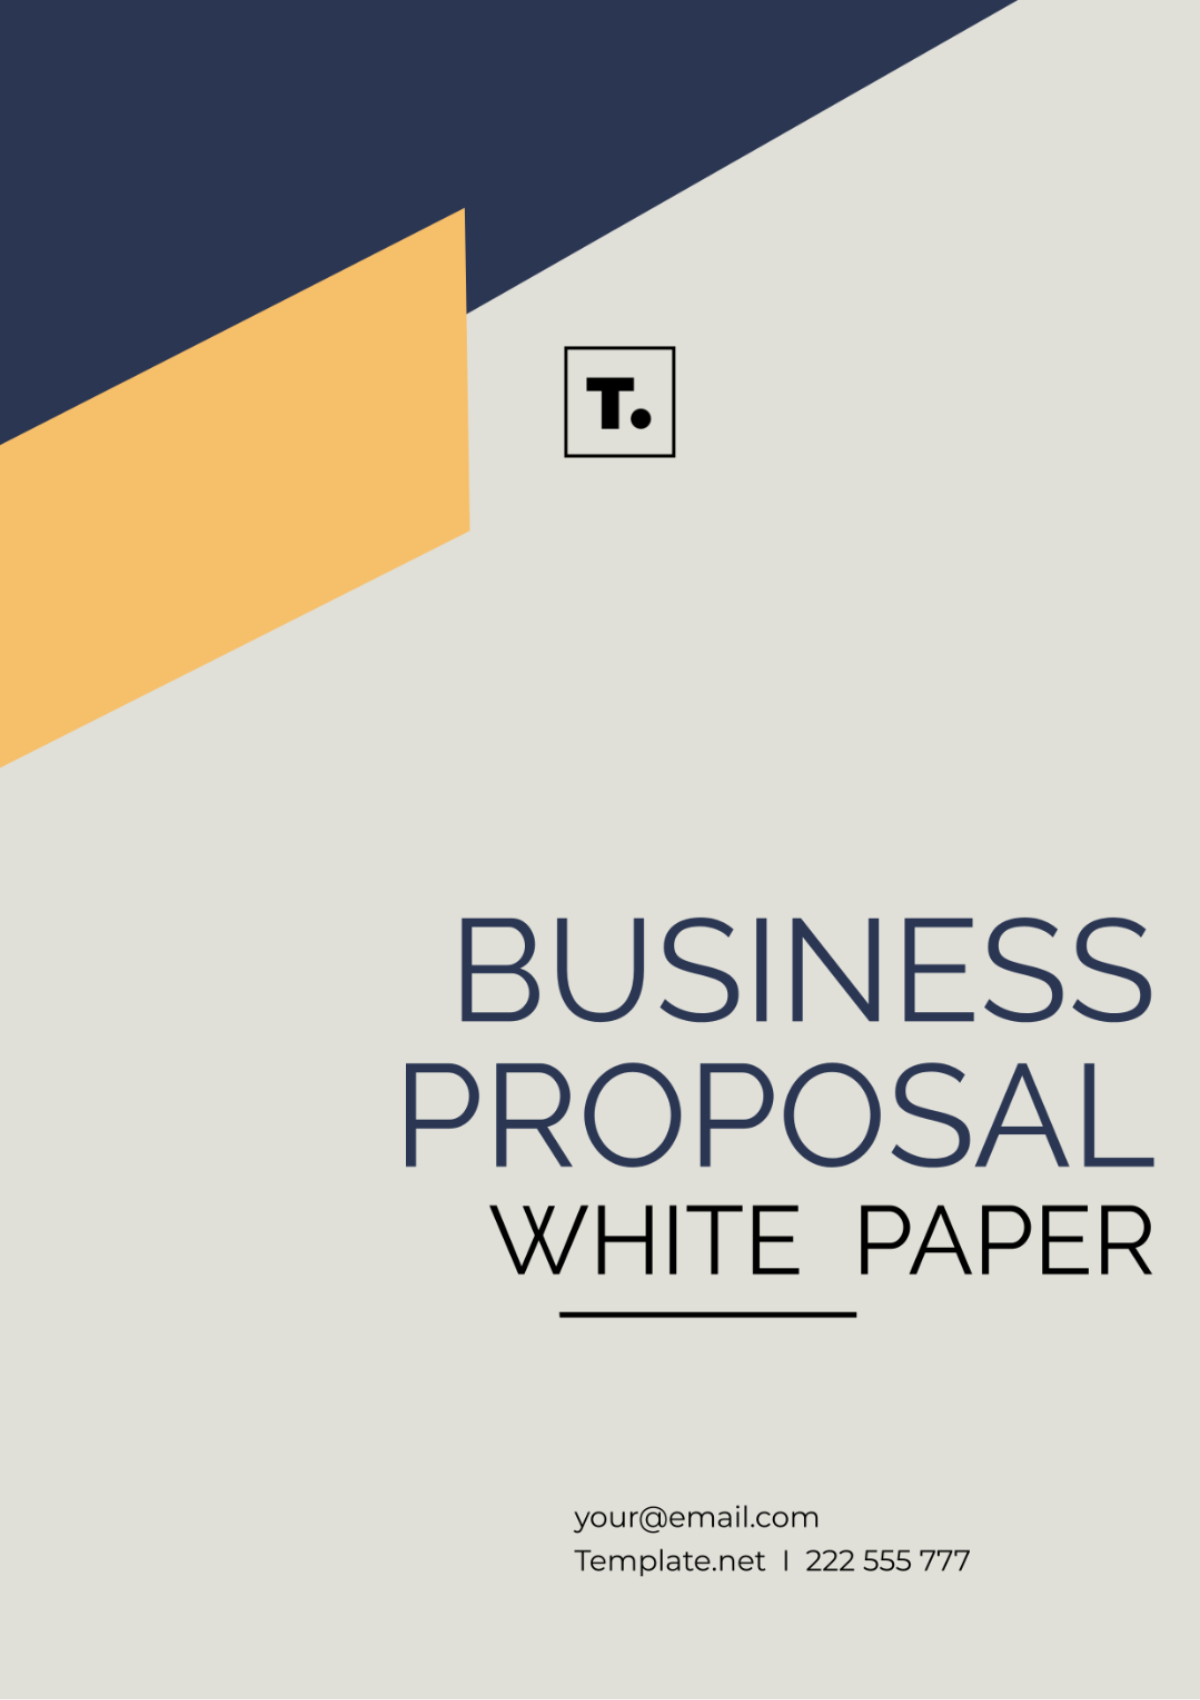 Business Proposal White Paper Template